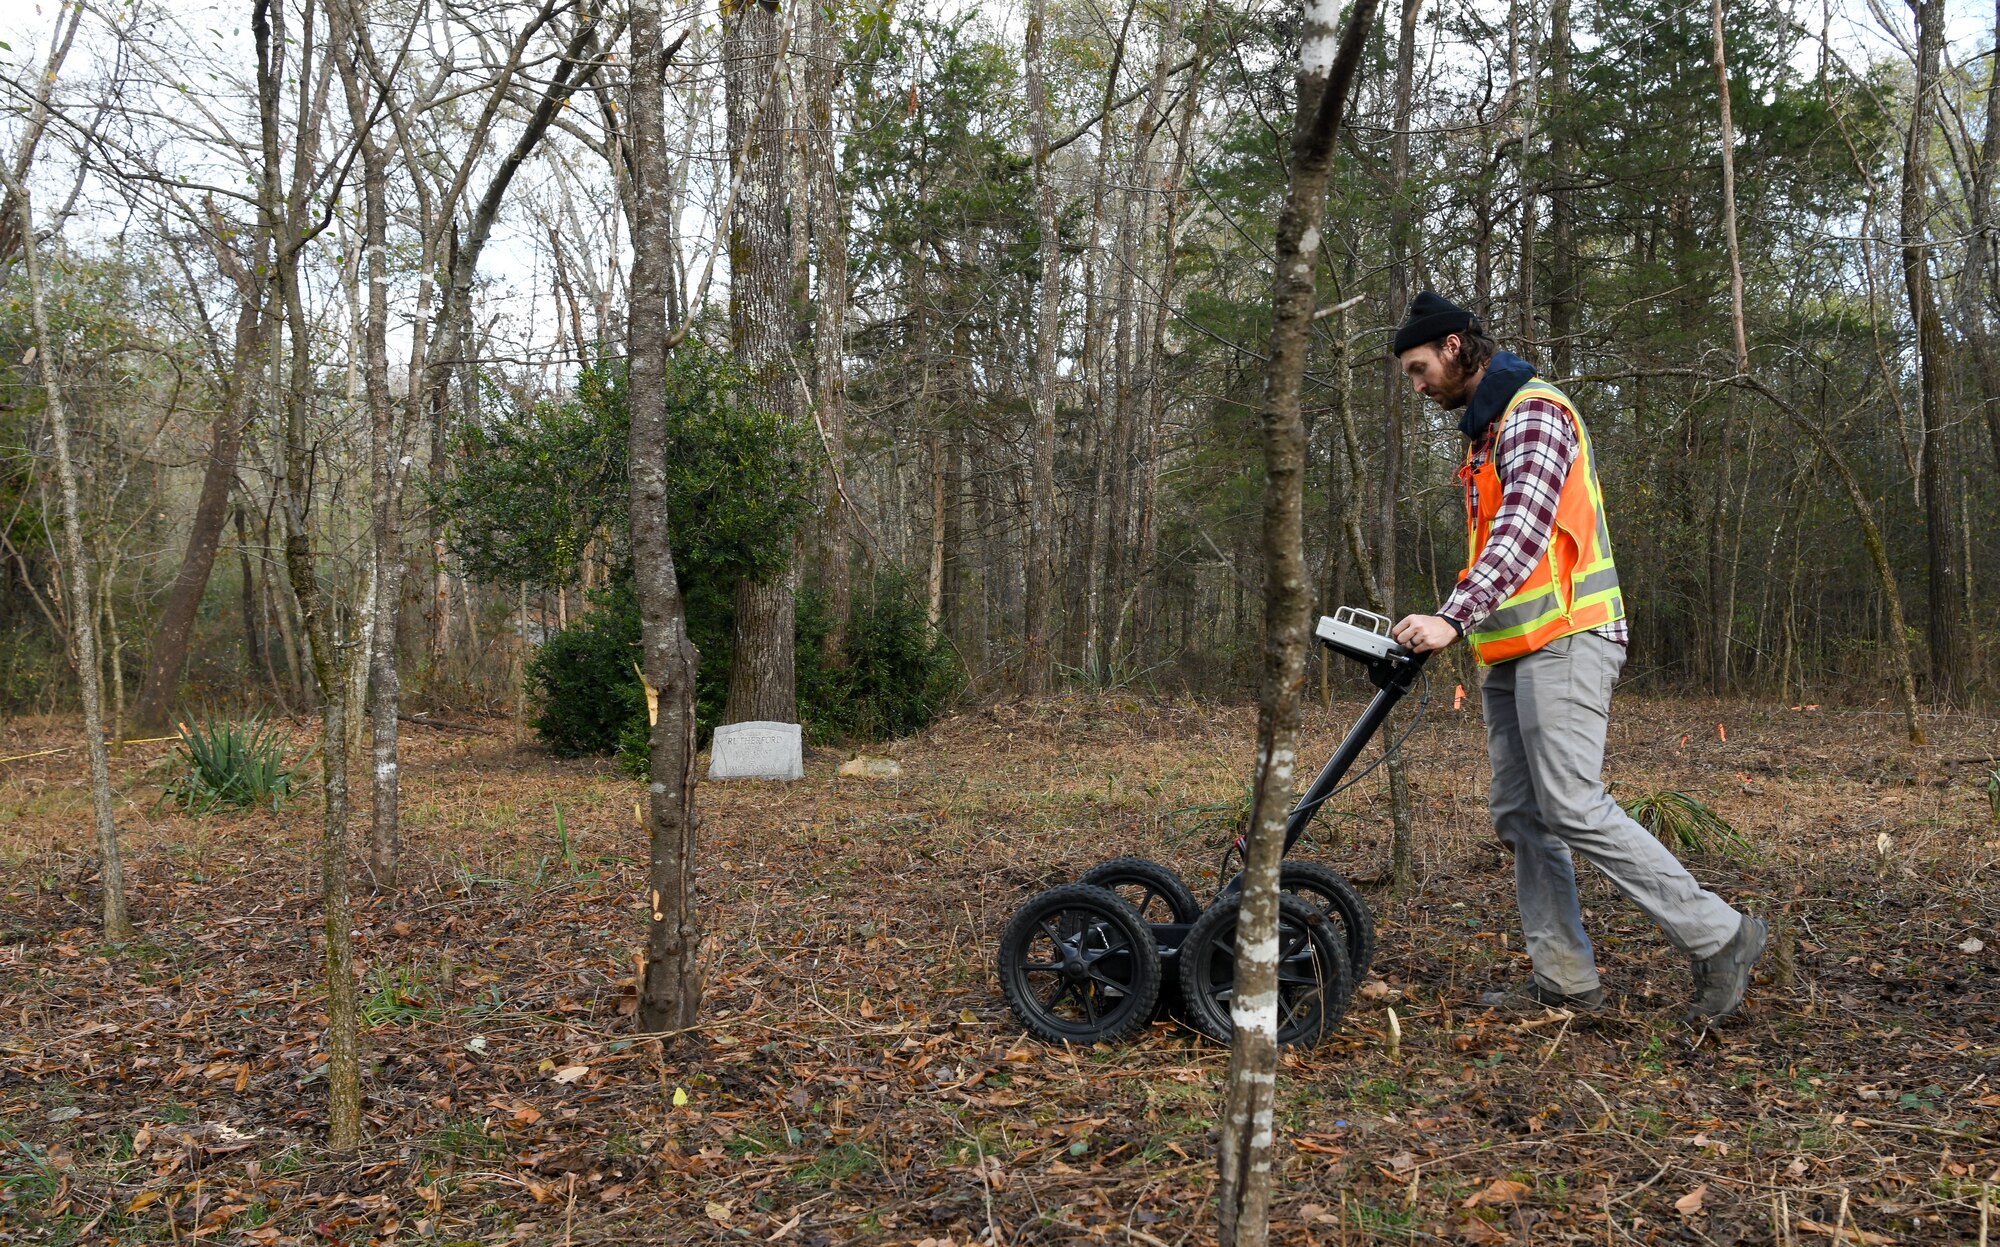 Jacob Jepsen, an archaeologist who specializes in geophysics, operates a ground penetrating radar machine in Rutherford-Shipley Cemetery at Arnold Air Force Base, Tennessee, Nov. 10, 2022. The GPR data gives archaeologists information about what has occurred below the surface to help detect possible grave locations. (U.S. Air Force photo by Jill Pickett)